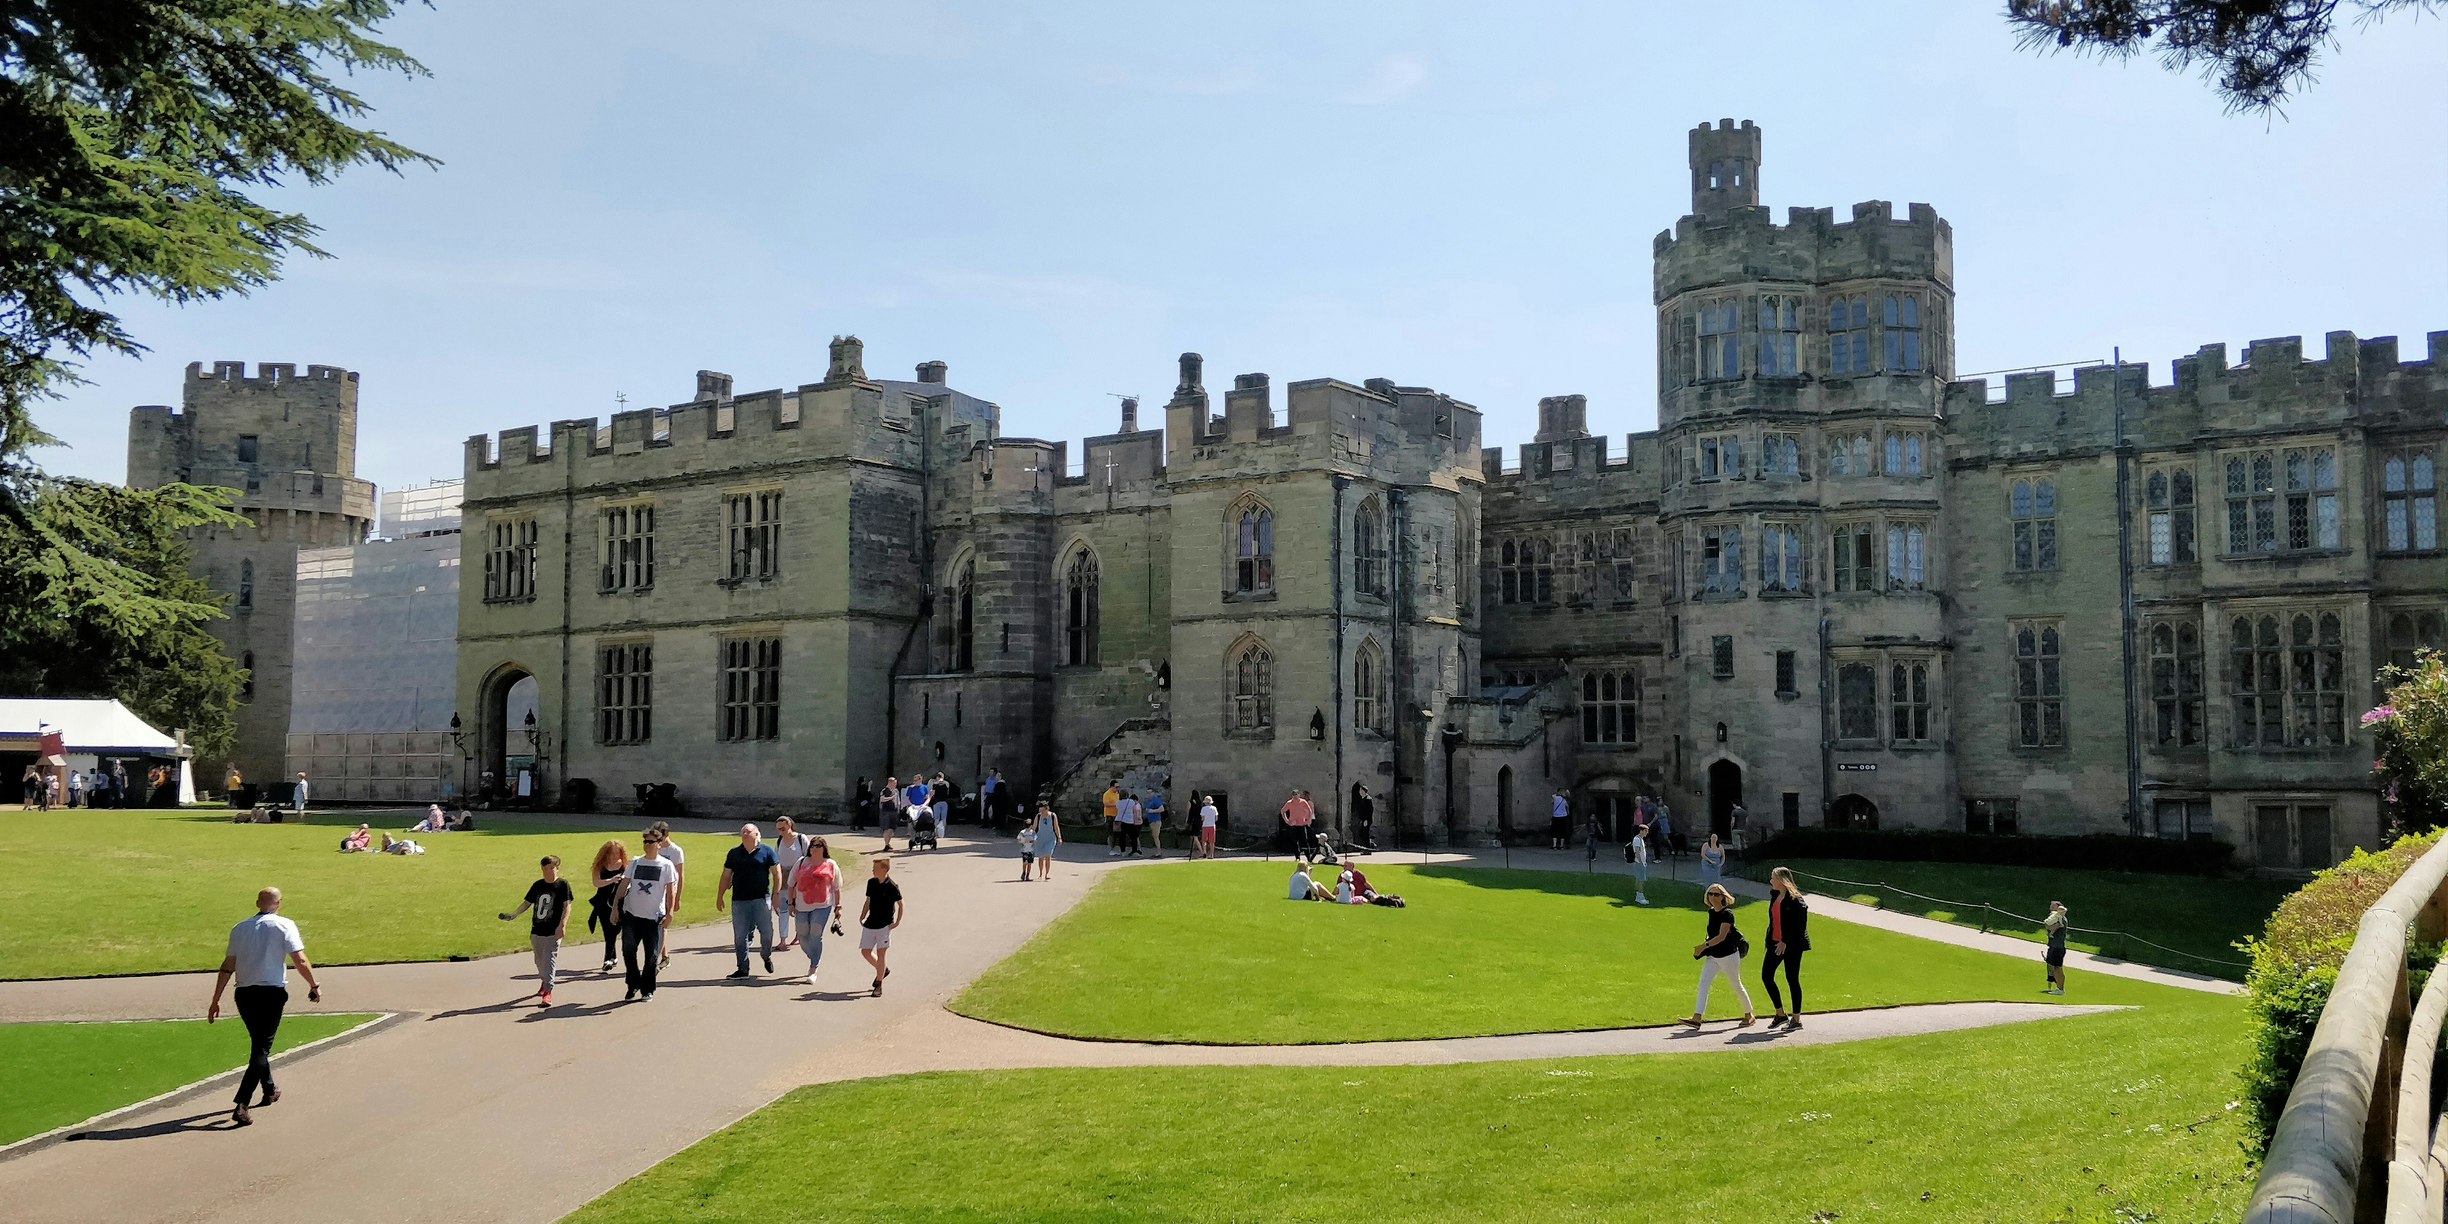 People explore the beautiful grounds of a large castle with turrets and huge stone battlements